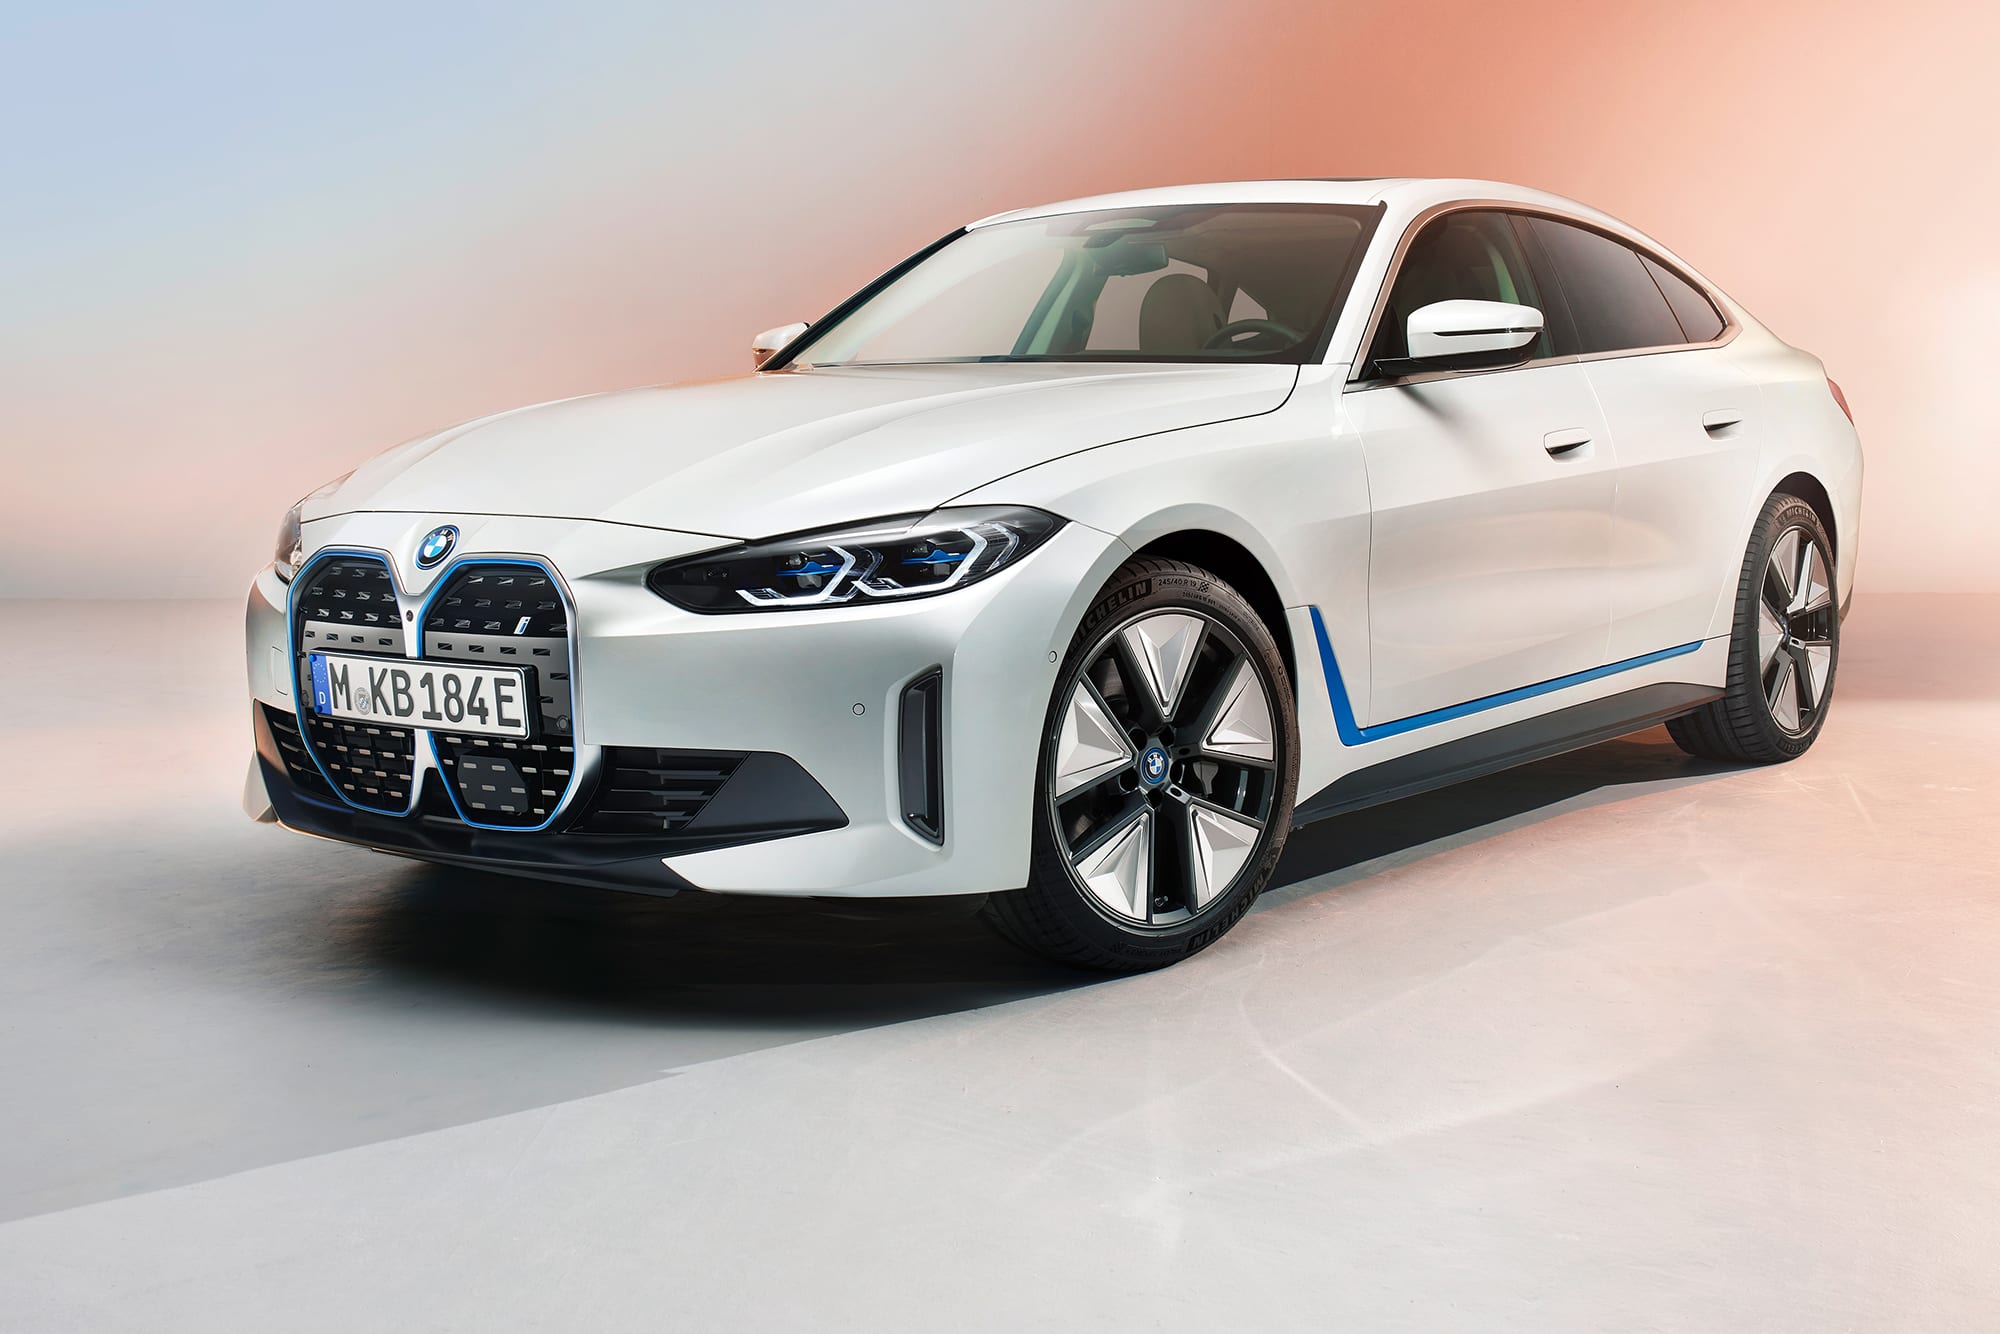 Archive Whichcar 2021 03 18 1 2022 Bmw I 4 Electric Car Revealed 1